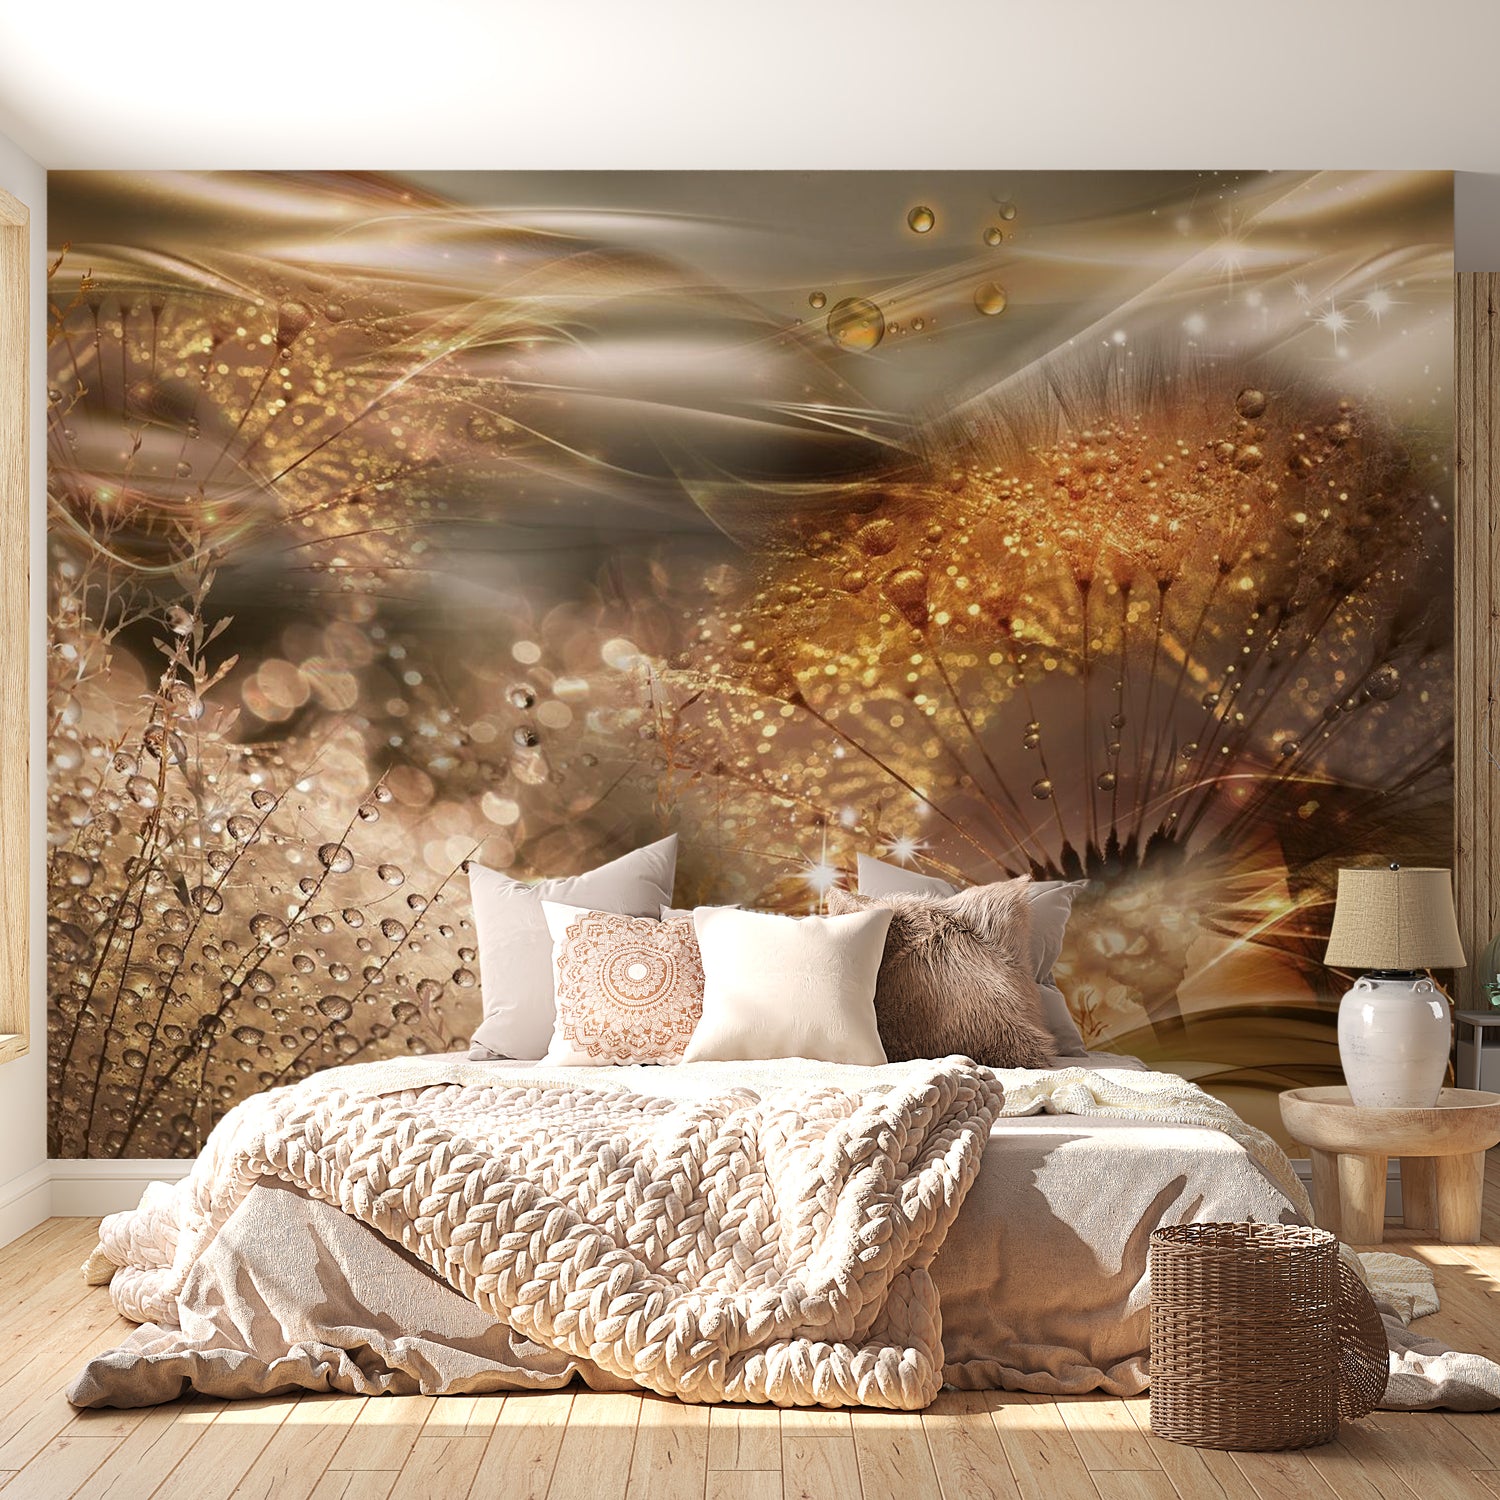 Peel & Stick Floral Wall Mural - Gold Dandelions - Removable Wall Decals